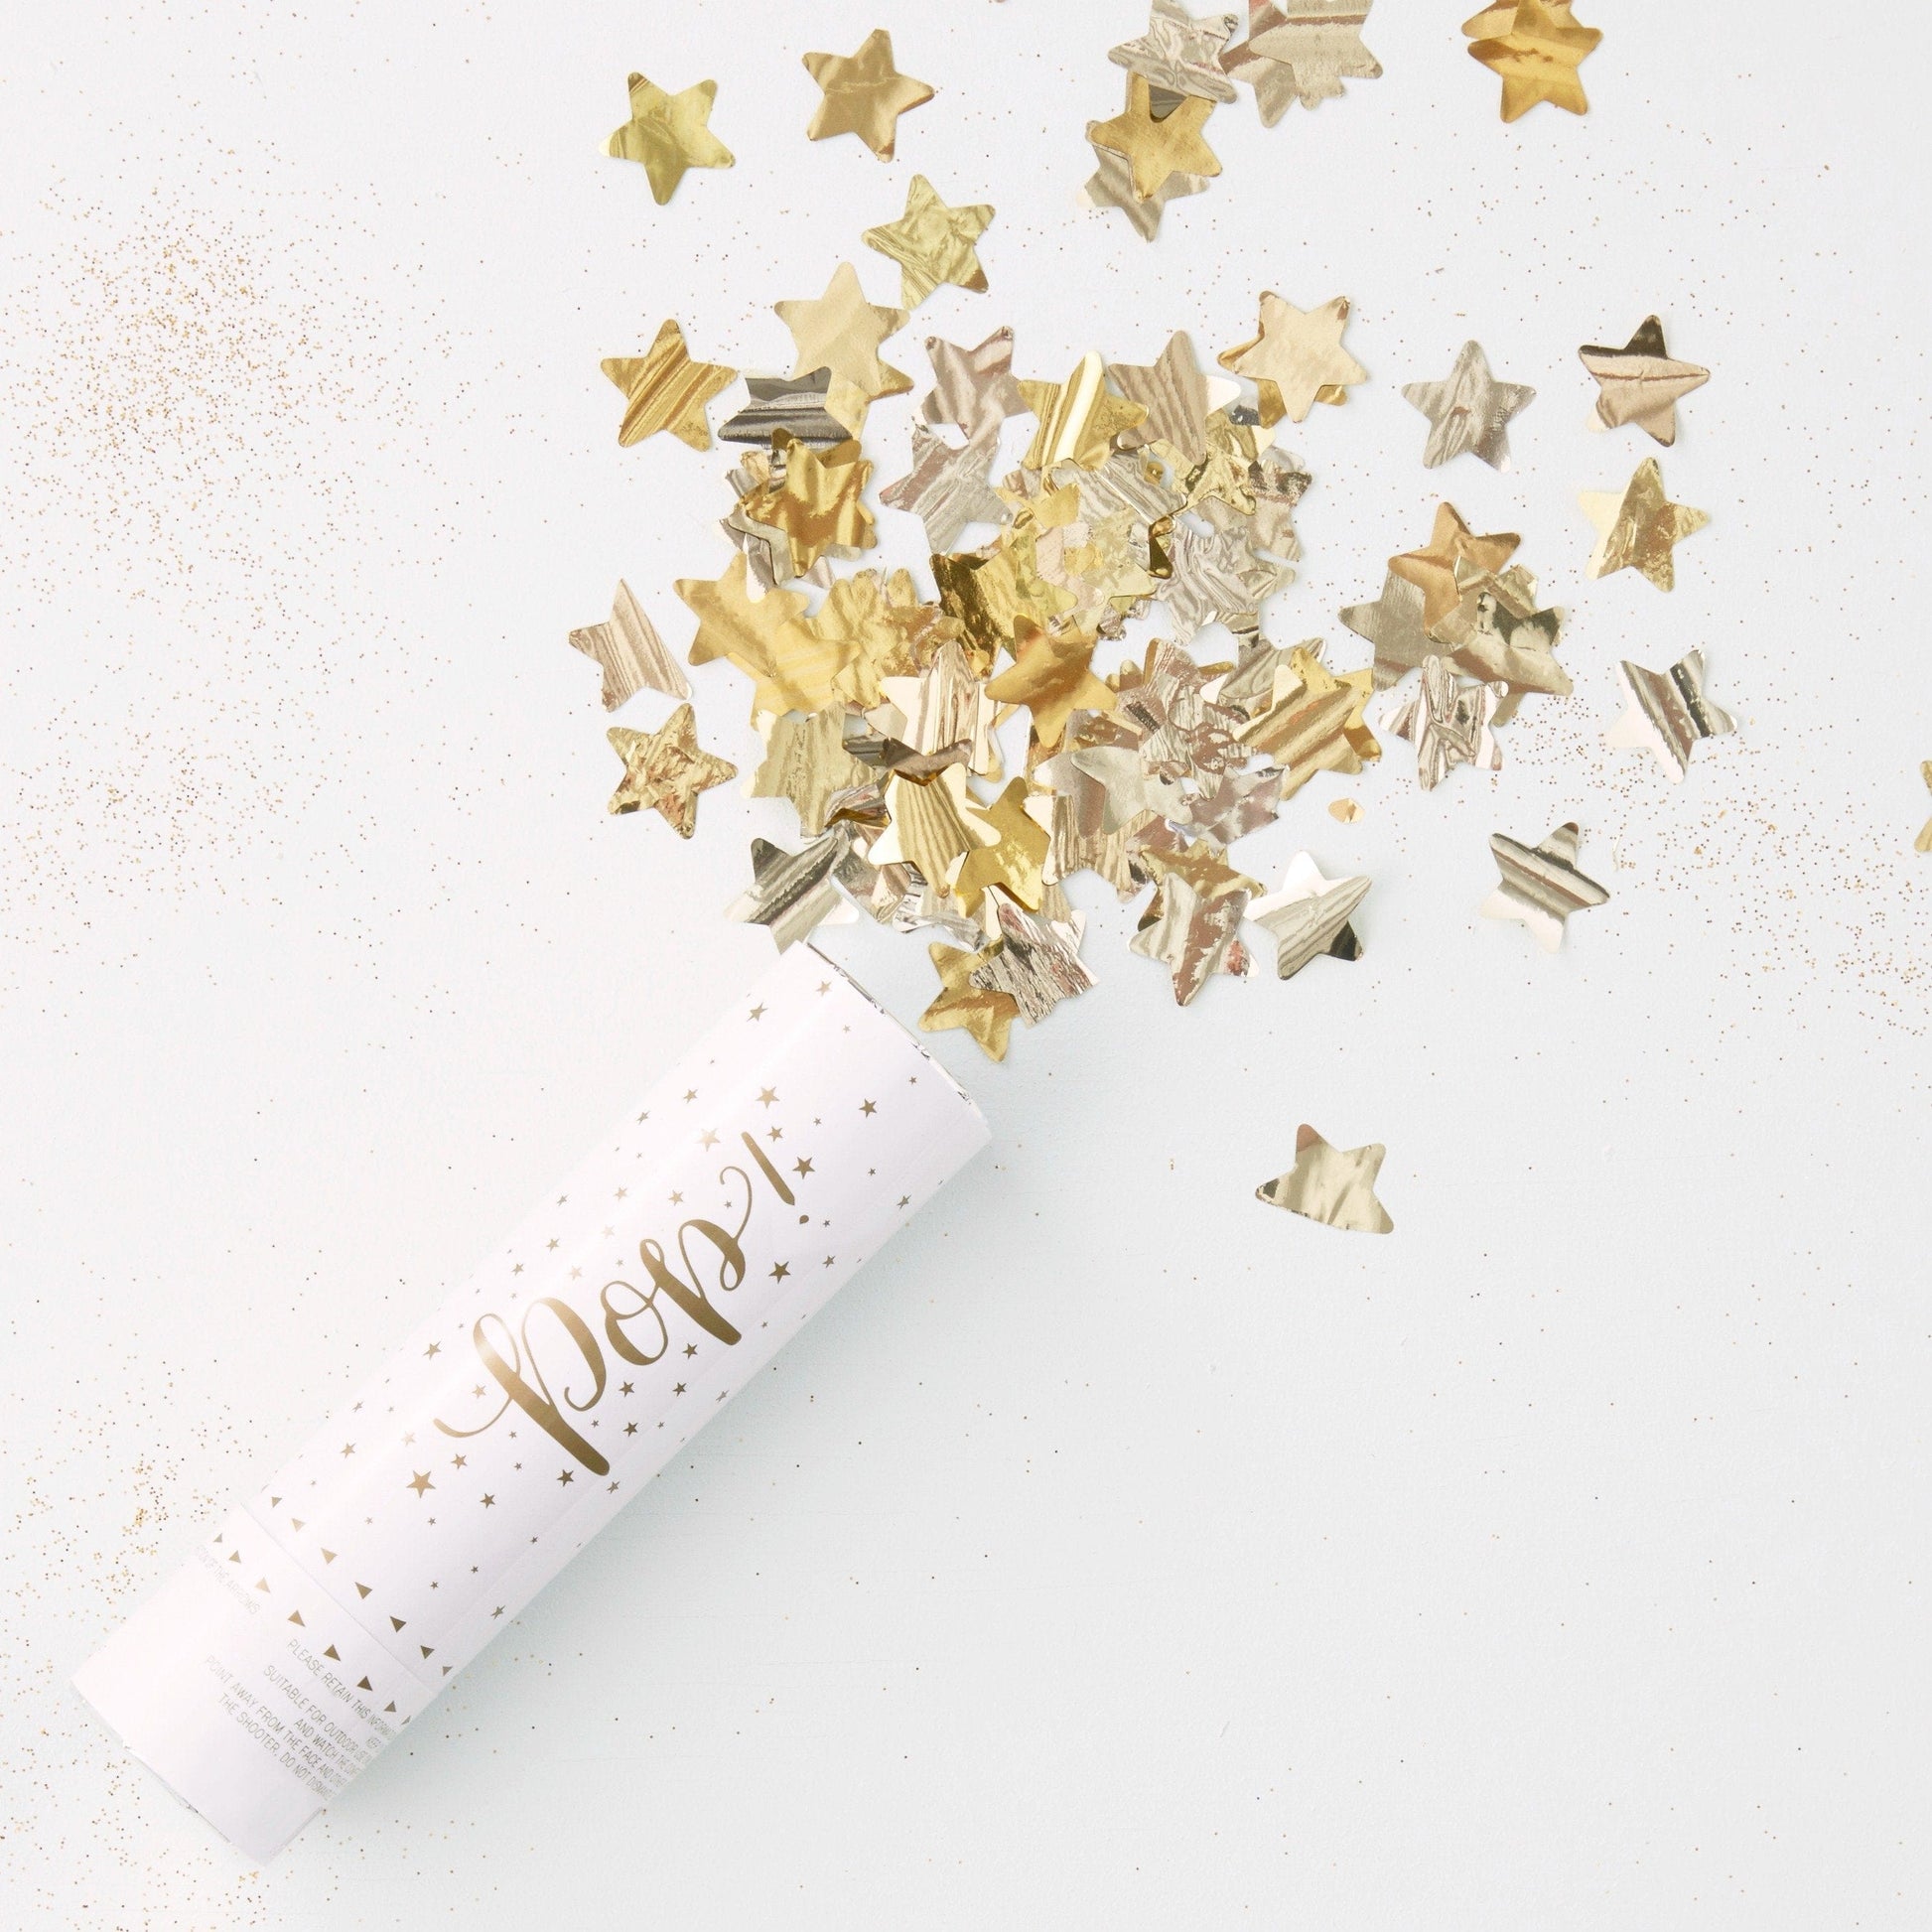 Small Confetti Cannon | Confetti Shooter | Ginger Ray UK Ginger Ray